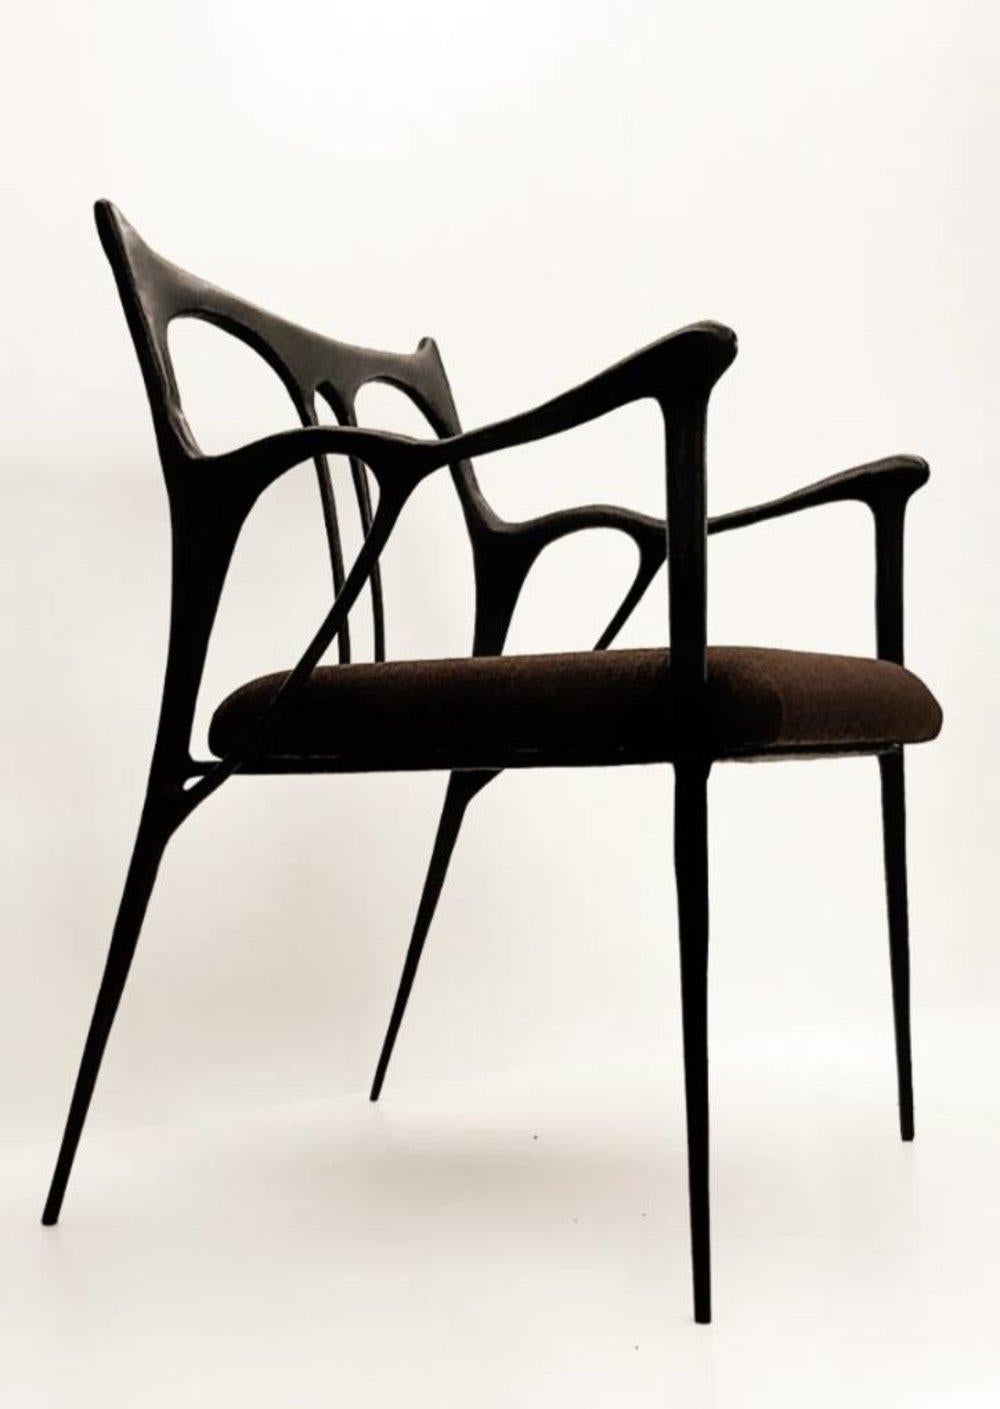 Black brass sculpted brass chair, Misaya
Dimensions: W 54 x L 58 x H 79 cm (seating: 63)
Hand-sculpted chair in brass.

The translation of Art Nouveau’s whiplash motifs through the subtle expression of an oriental brushstroke. The sculpturally slim